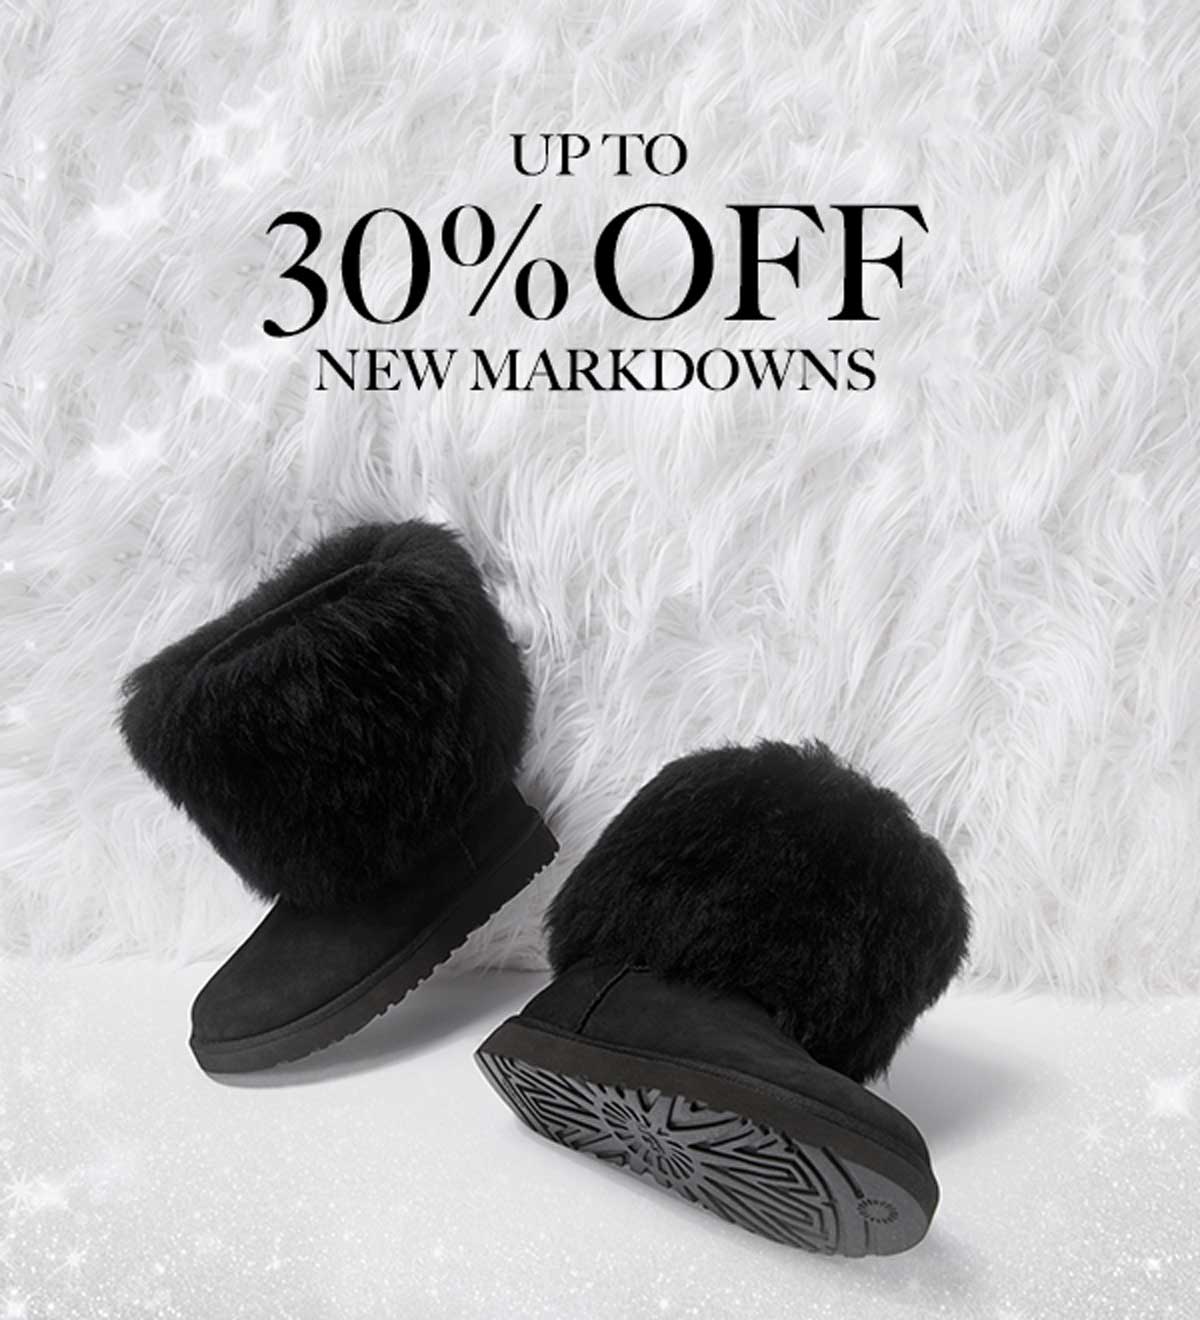 30 Percent Off Ugg Boots Black Friday 2017 Fashion Blog By Apparel Search We hope you have an amazing day celebrating with family and friends! fashion blog by apparel search